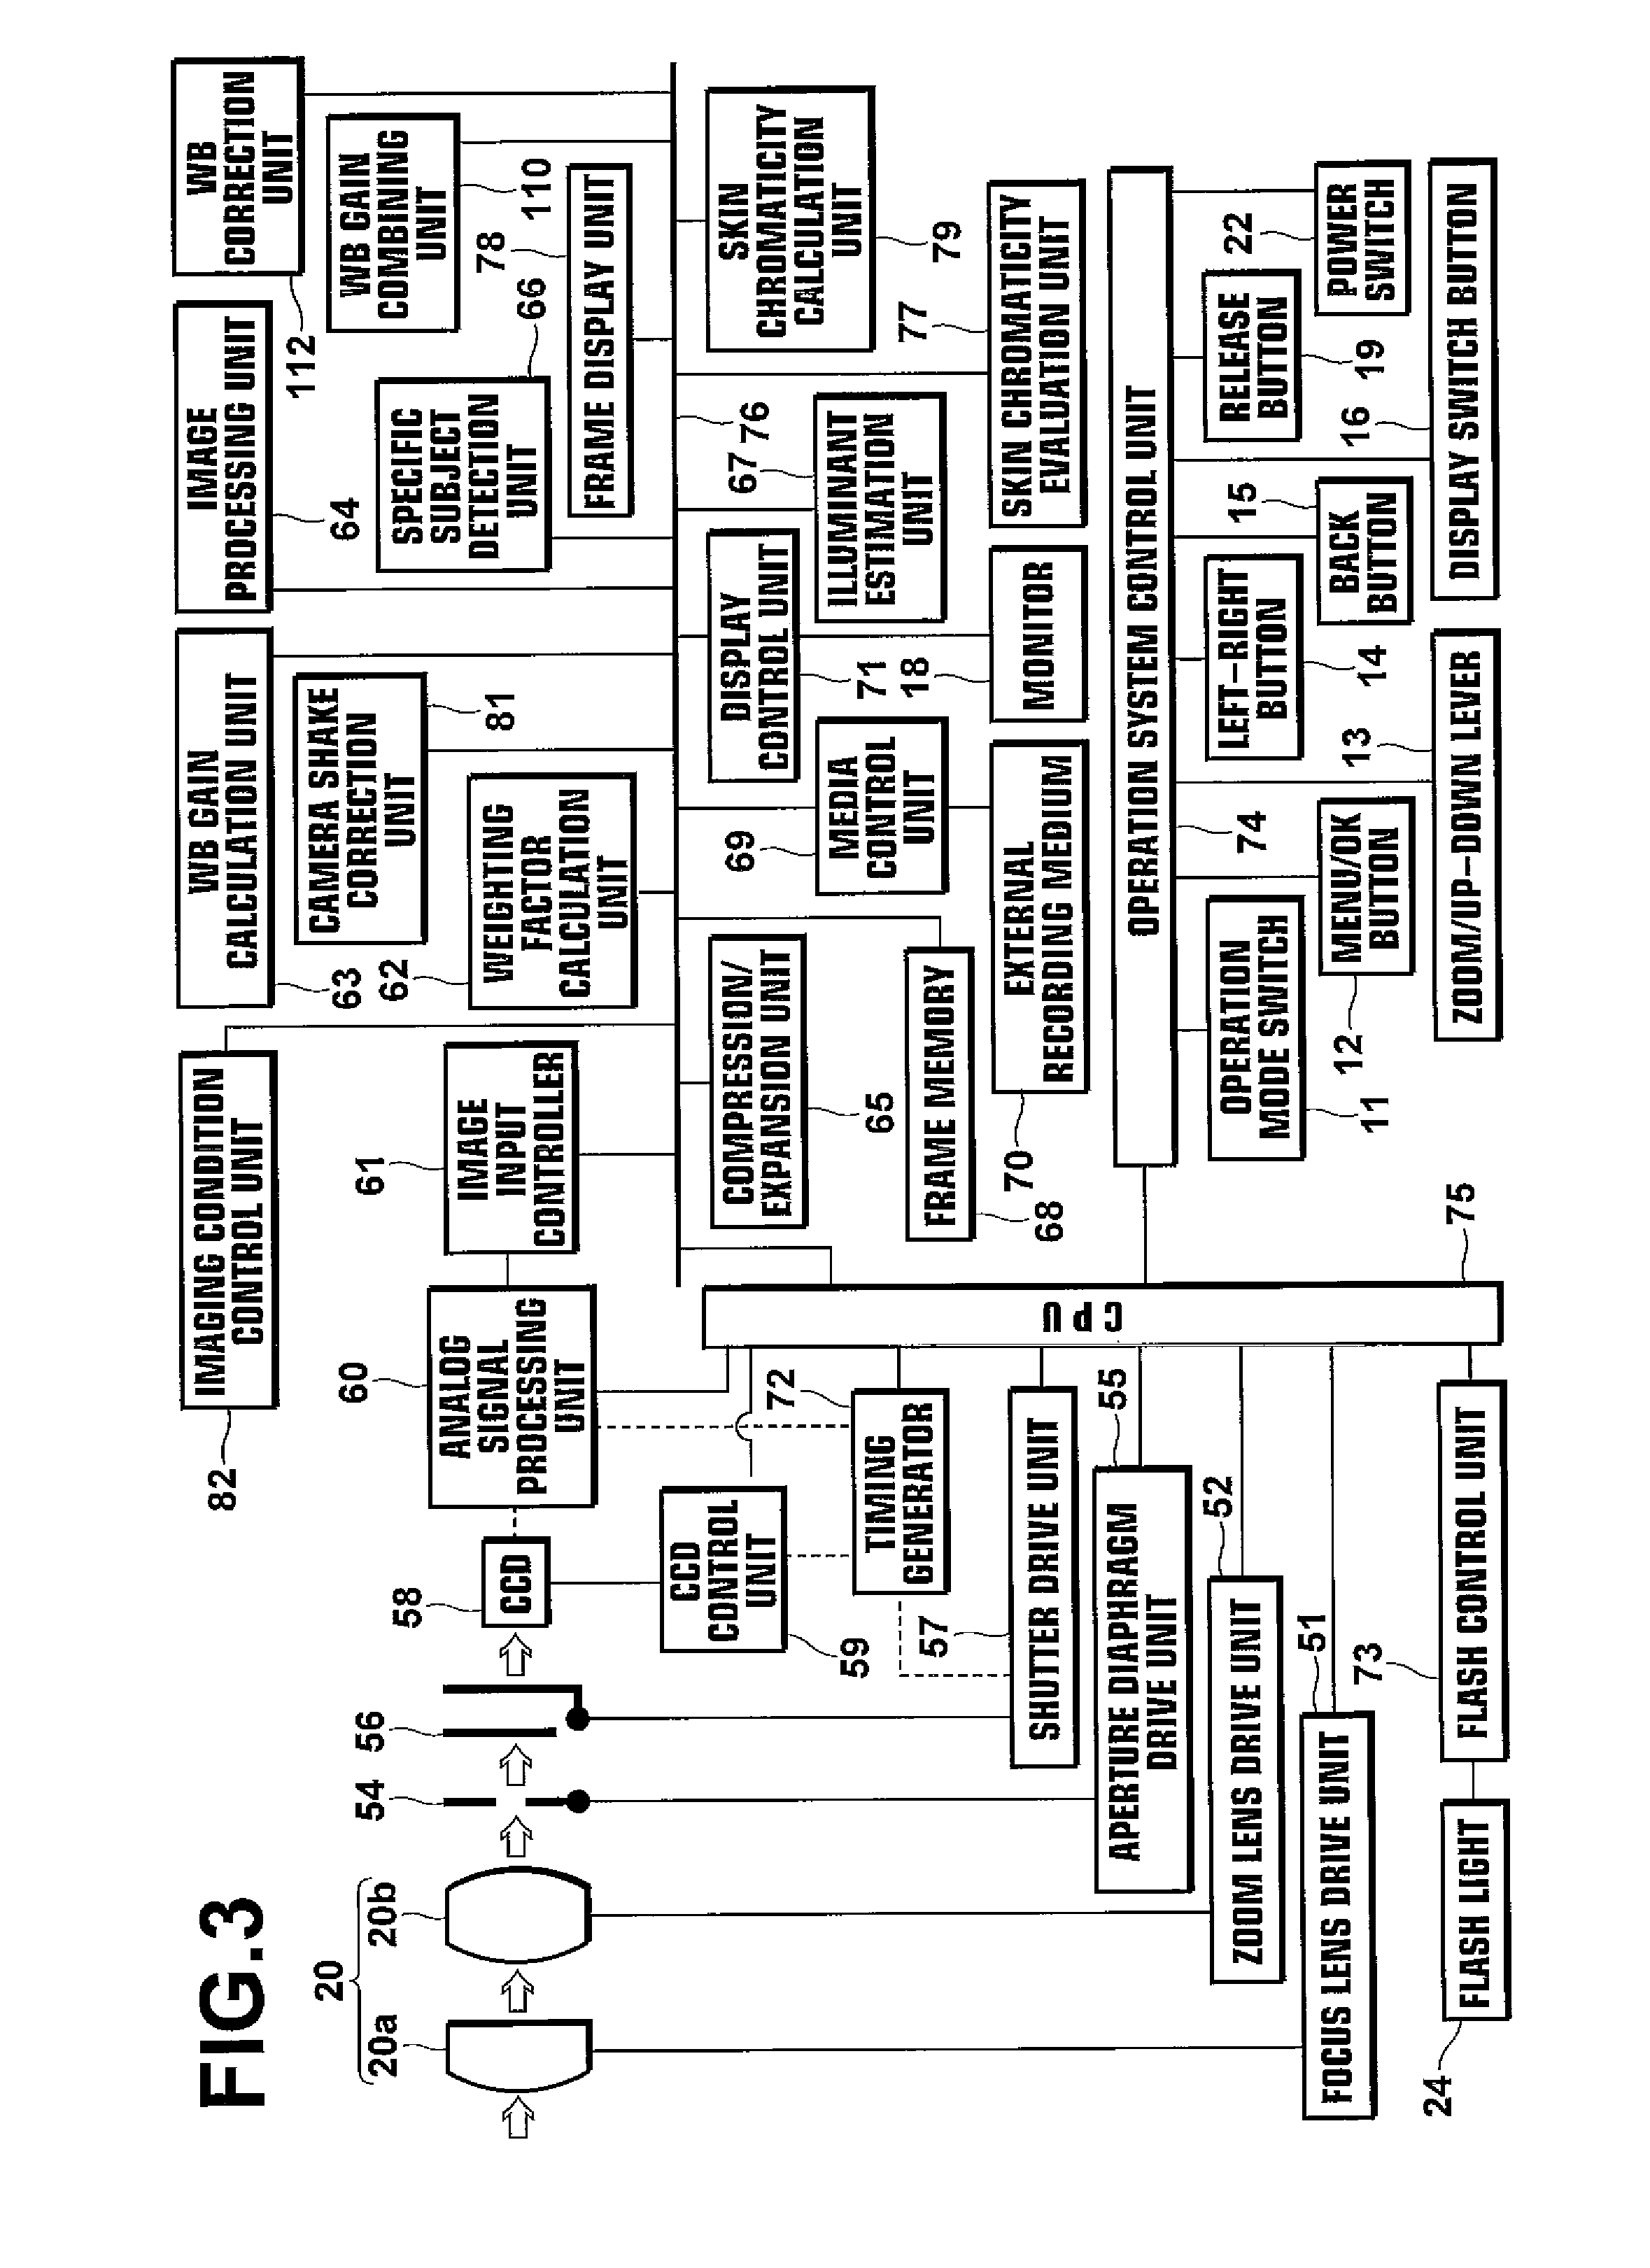 Image processing apparatus, method, and computer program product